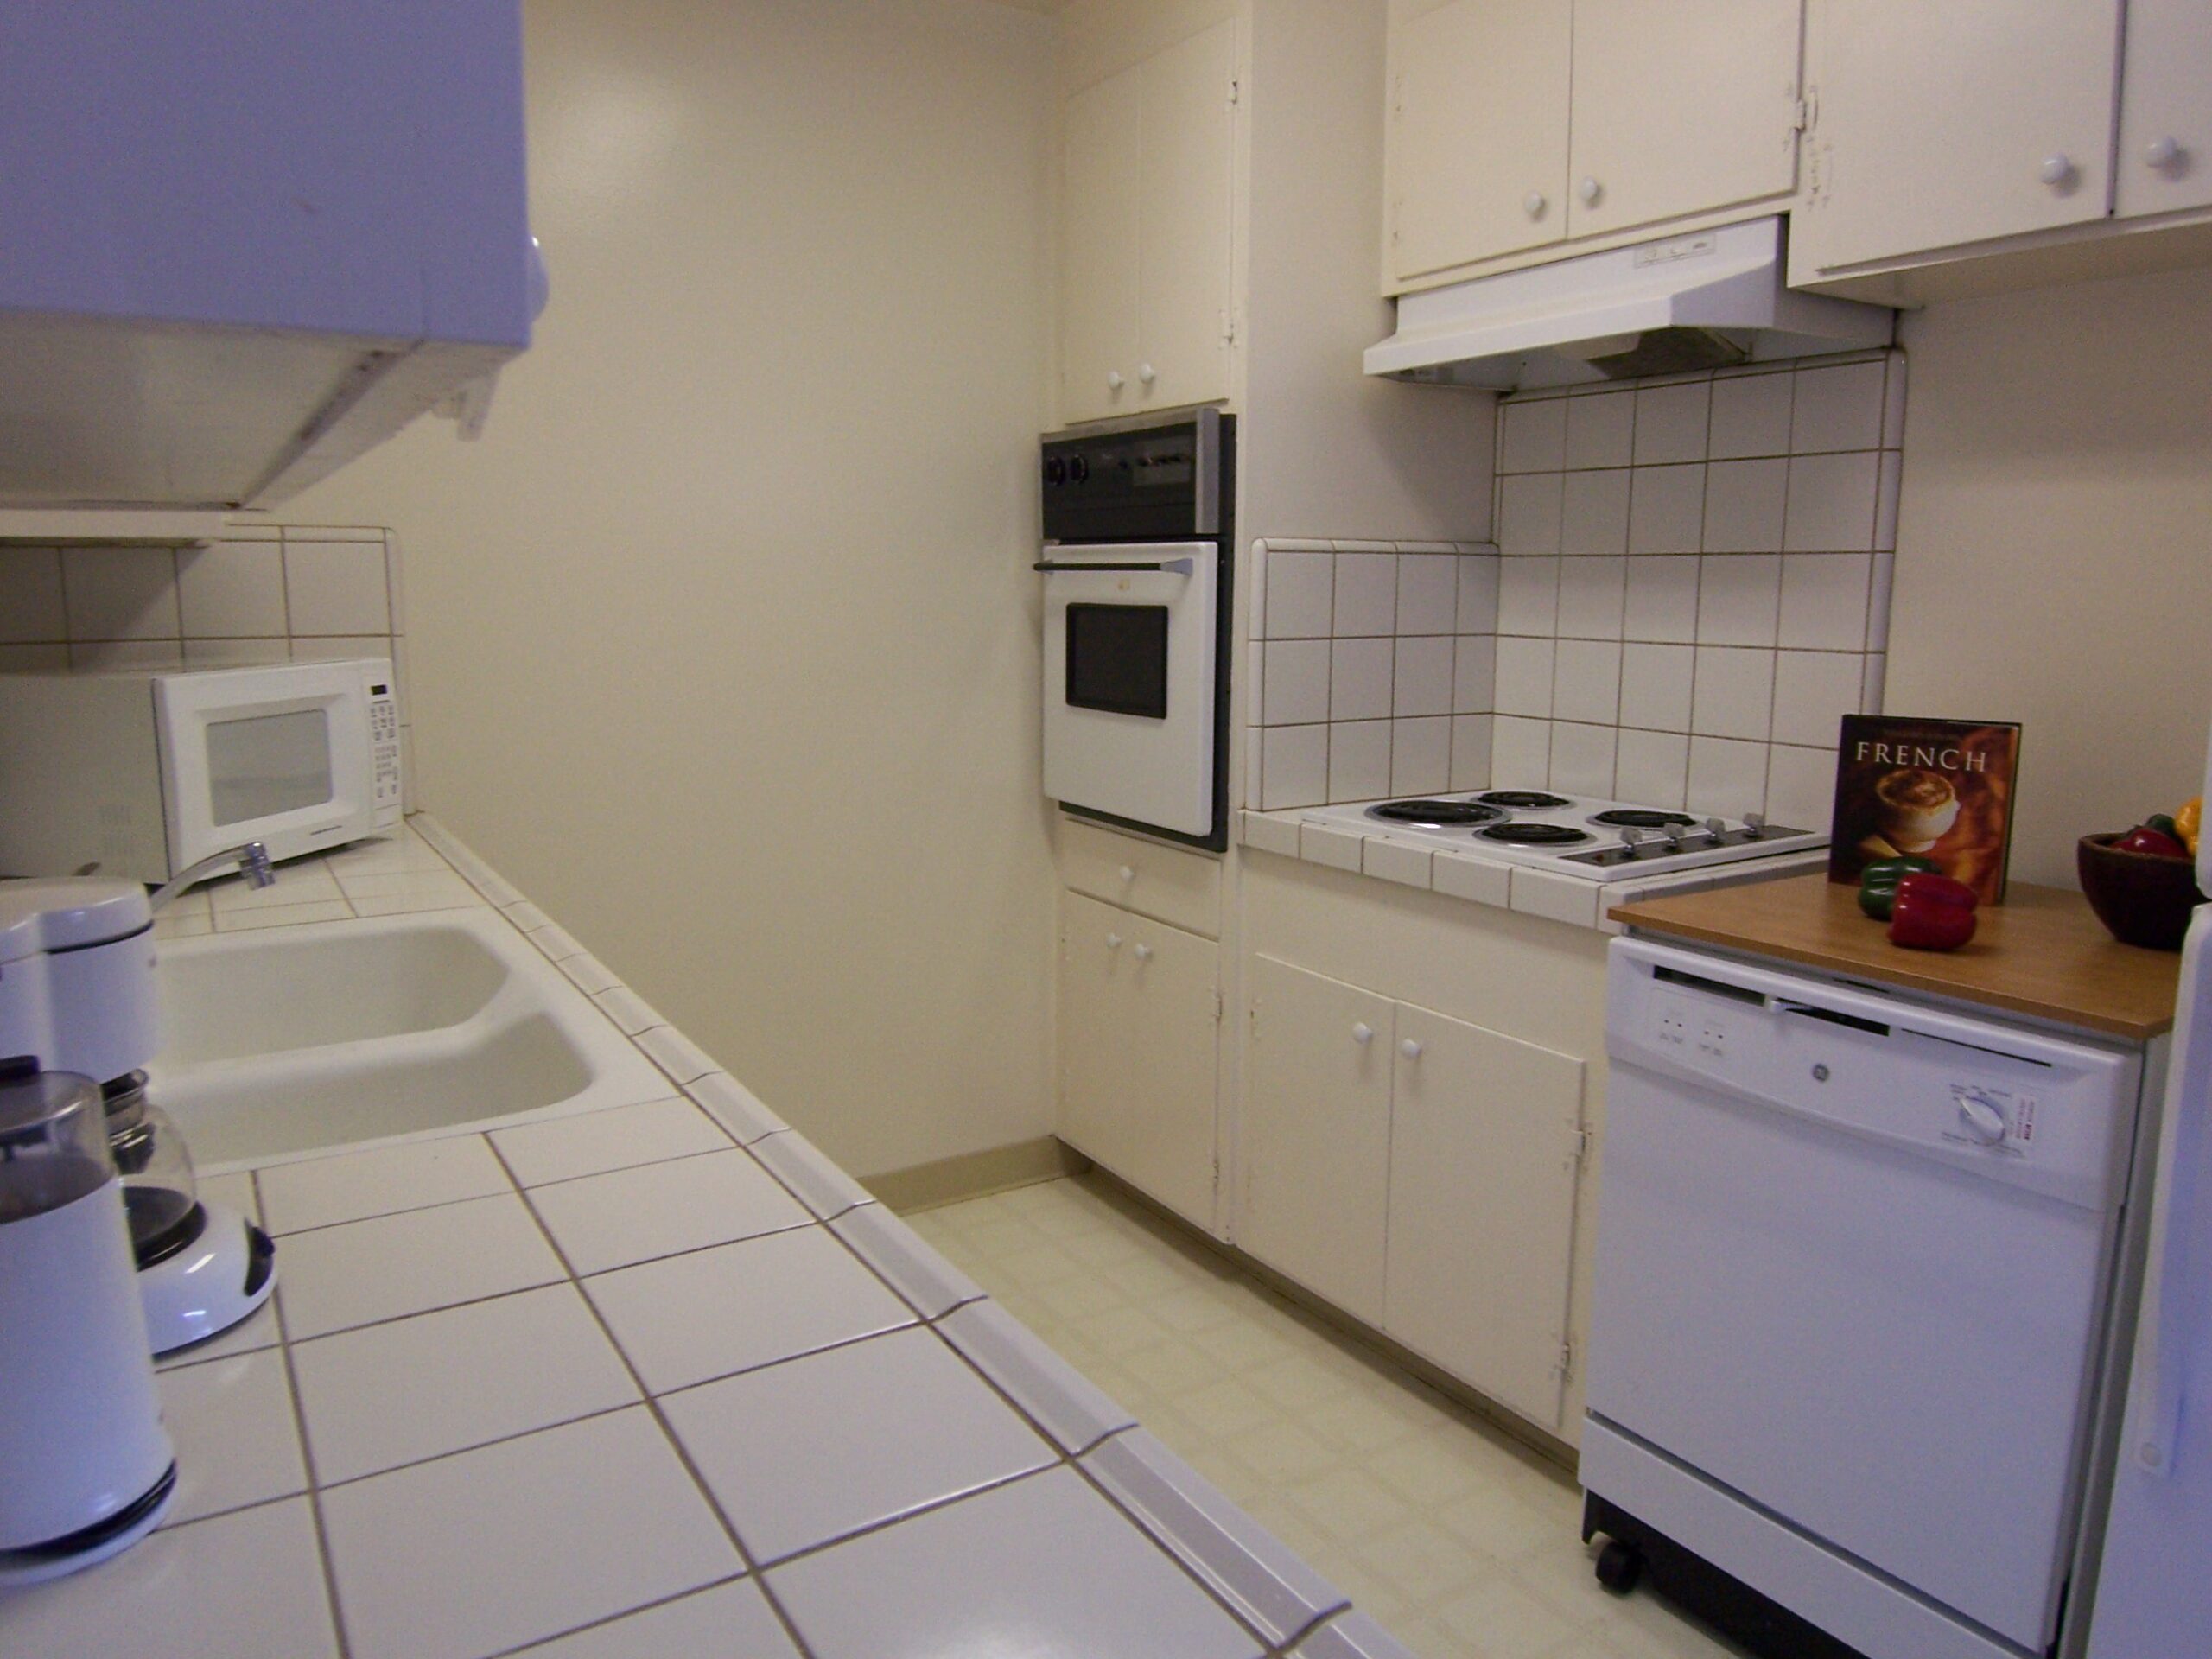 A kitchen with white tile and white appliances.